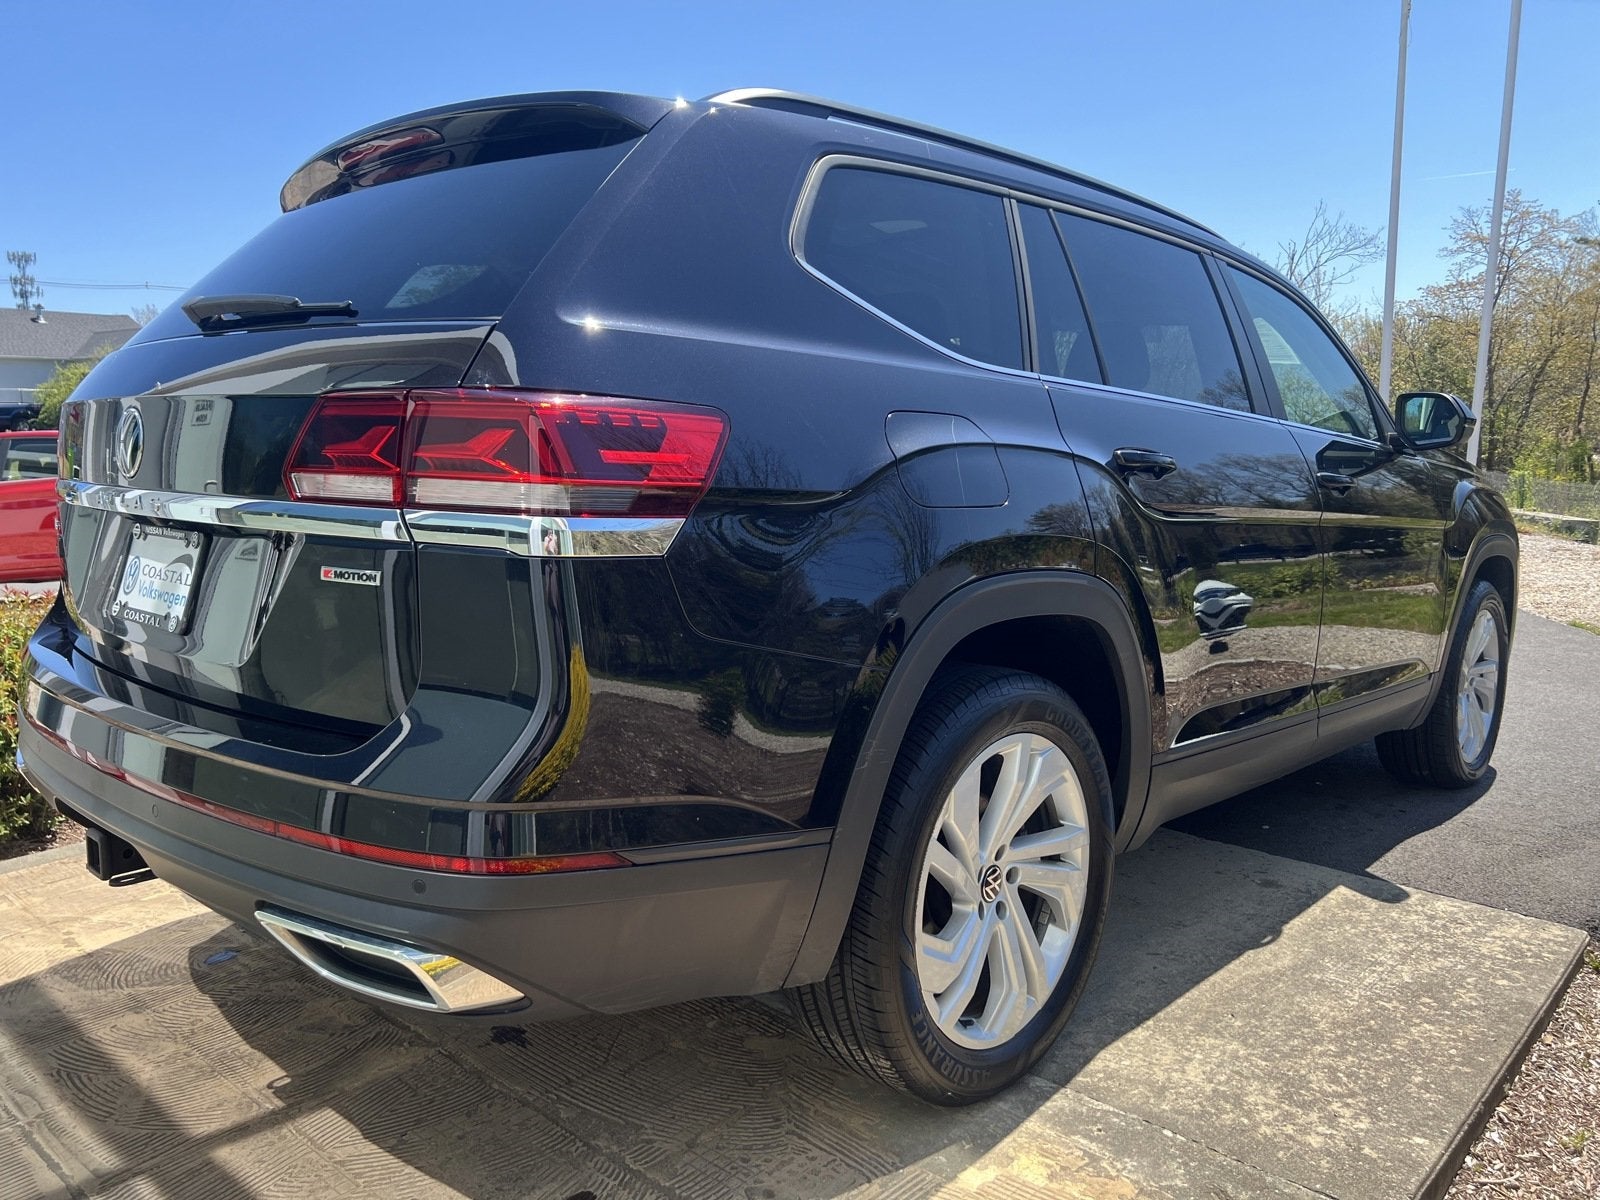 2021 Volkswagen Atlas 3.6L V6 SE w/Technology W/Panoramic Sunroof & Captains Chairs